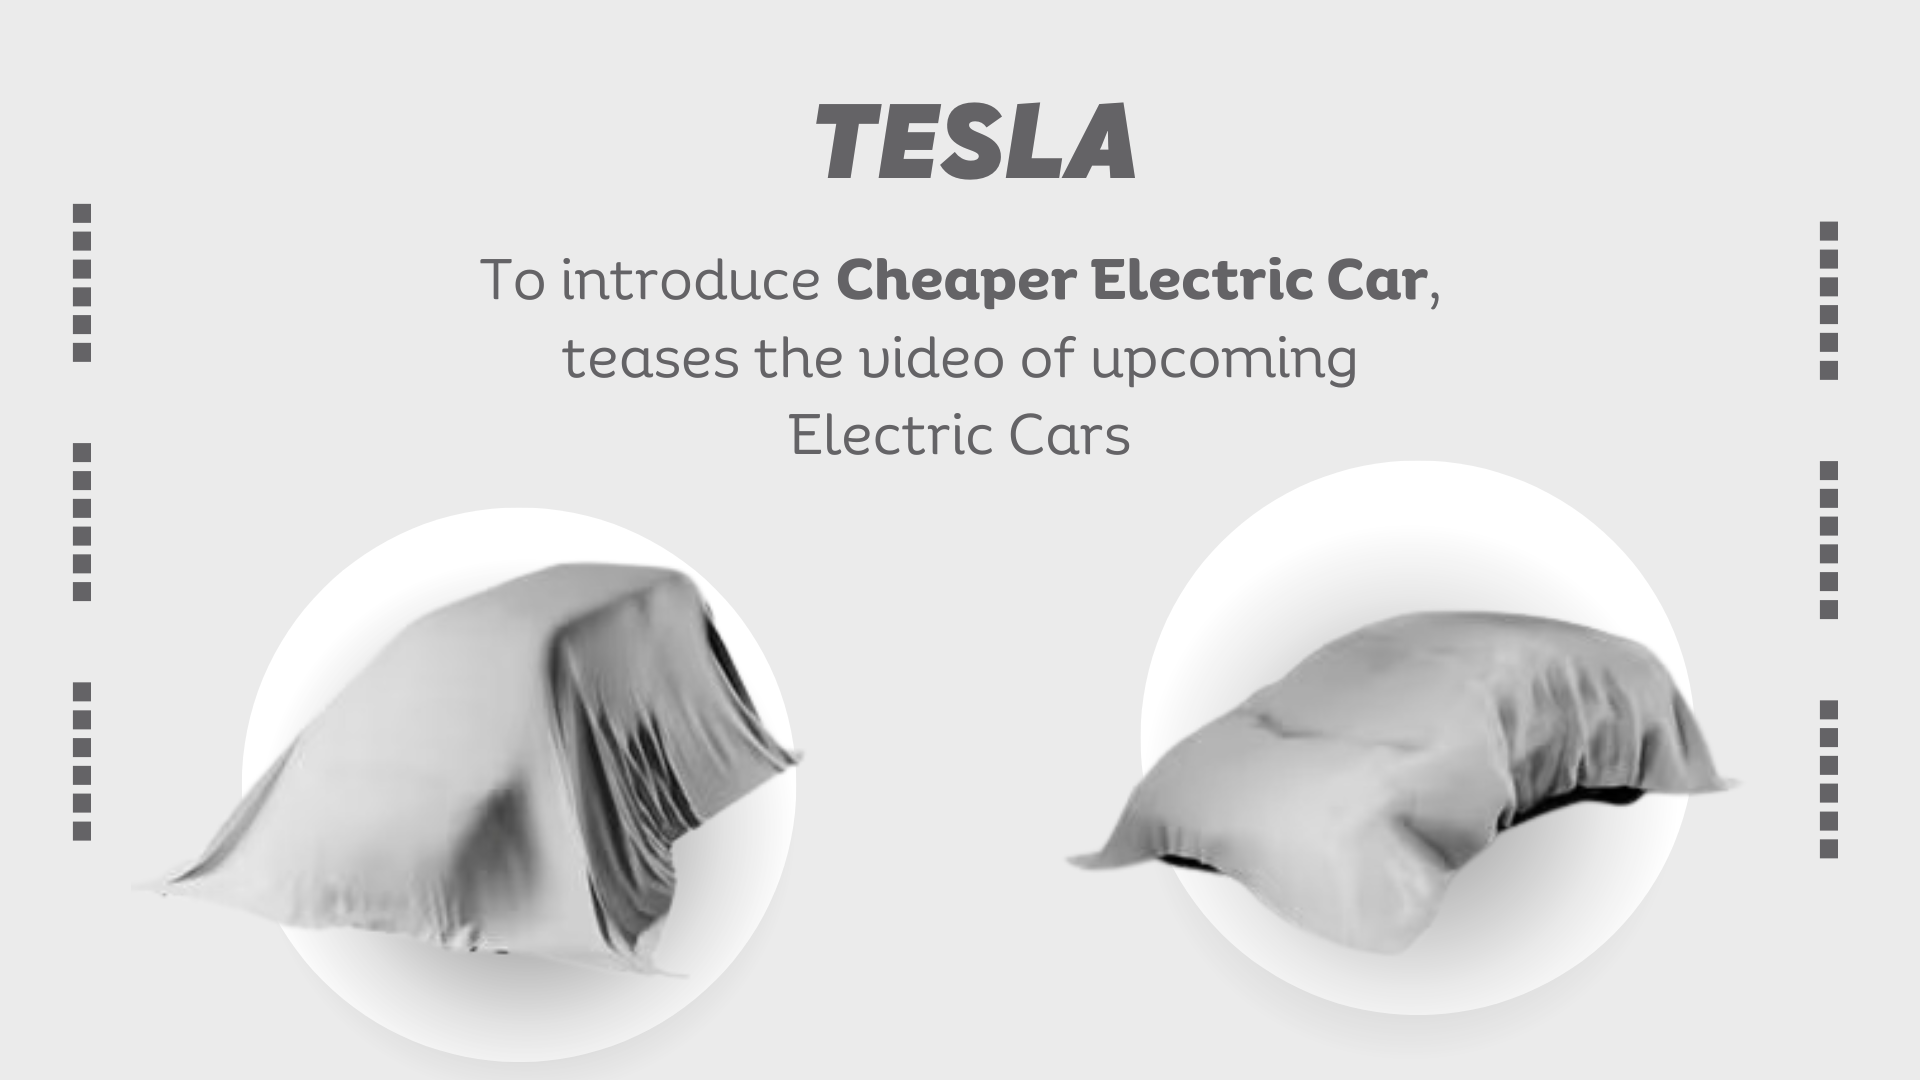 https://e-vehicleinfo.com/global/tesla-to-introduce-cheaper-electric-cars-teases-video-of-upcoming-tesla-cars/